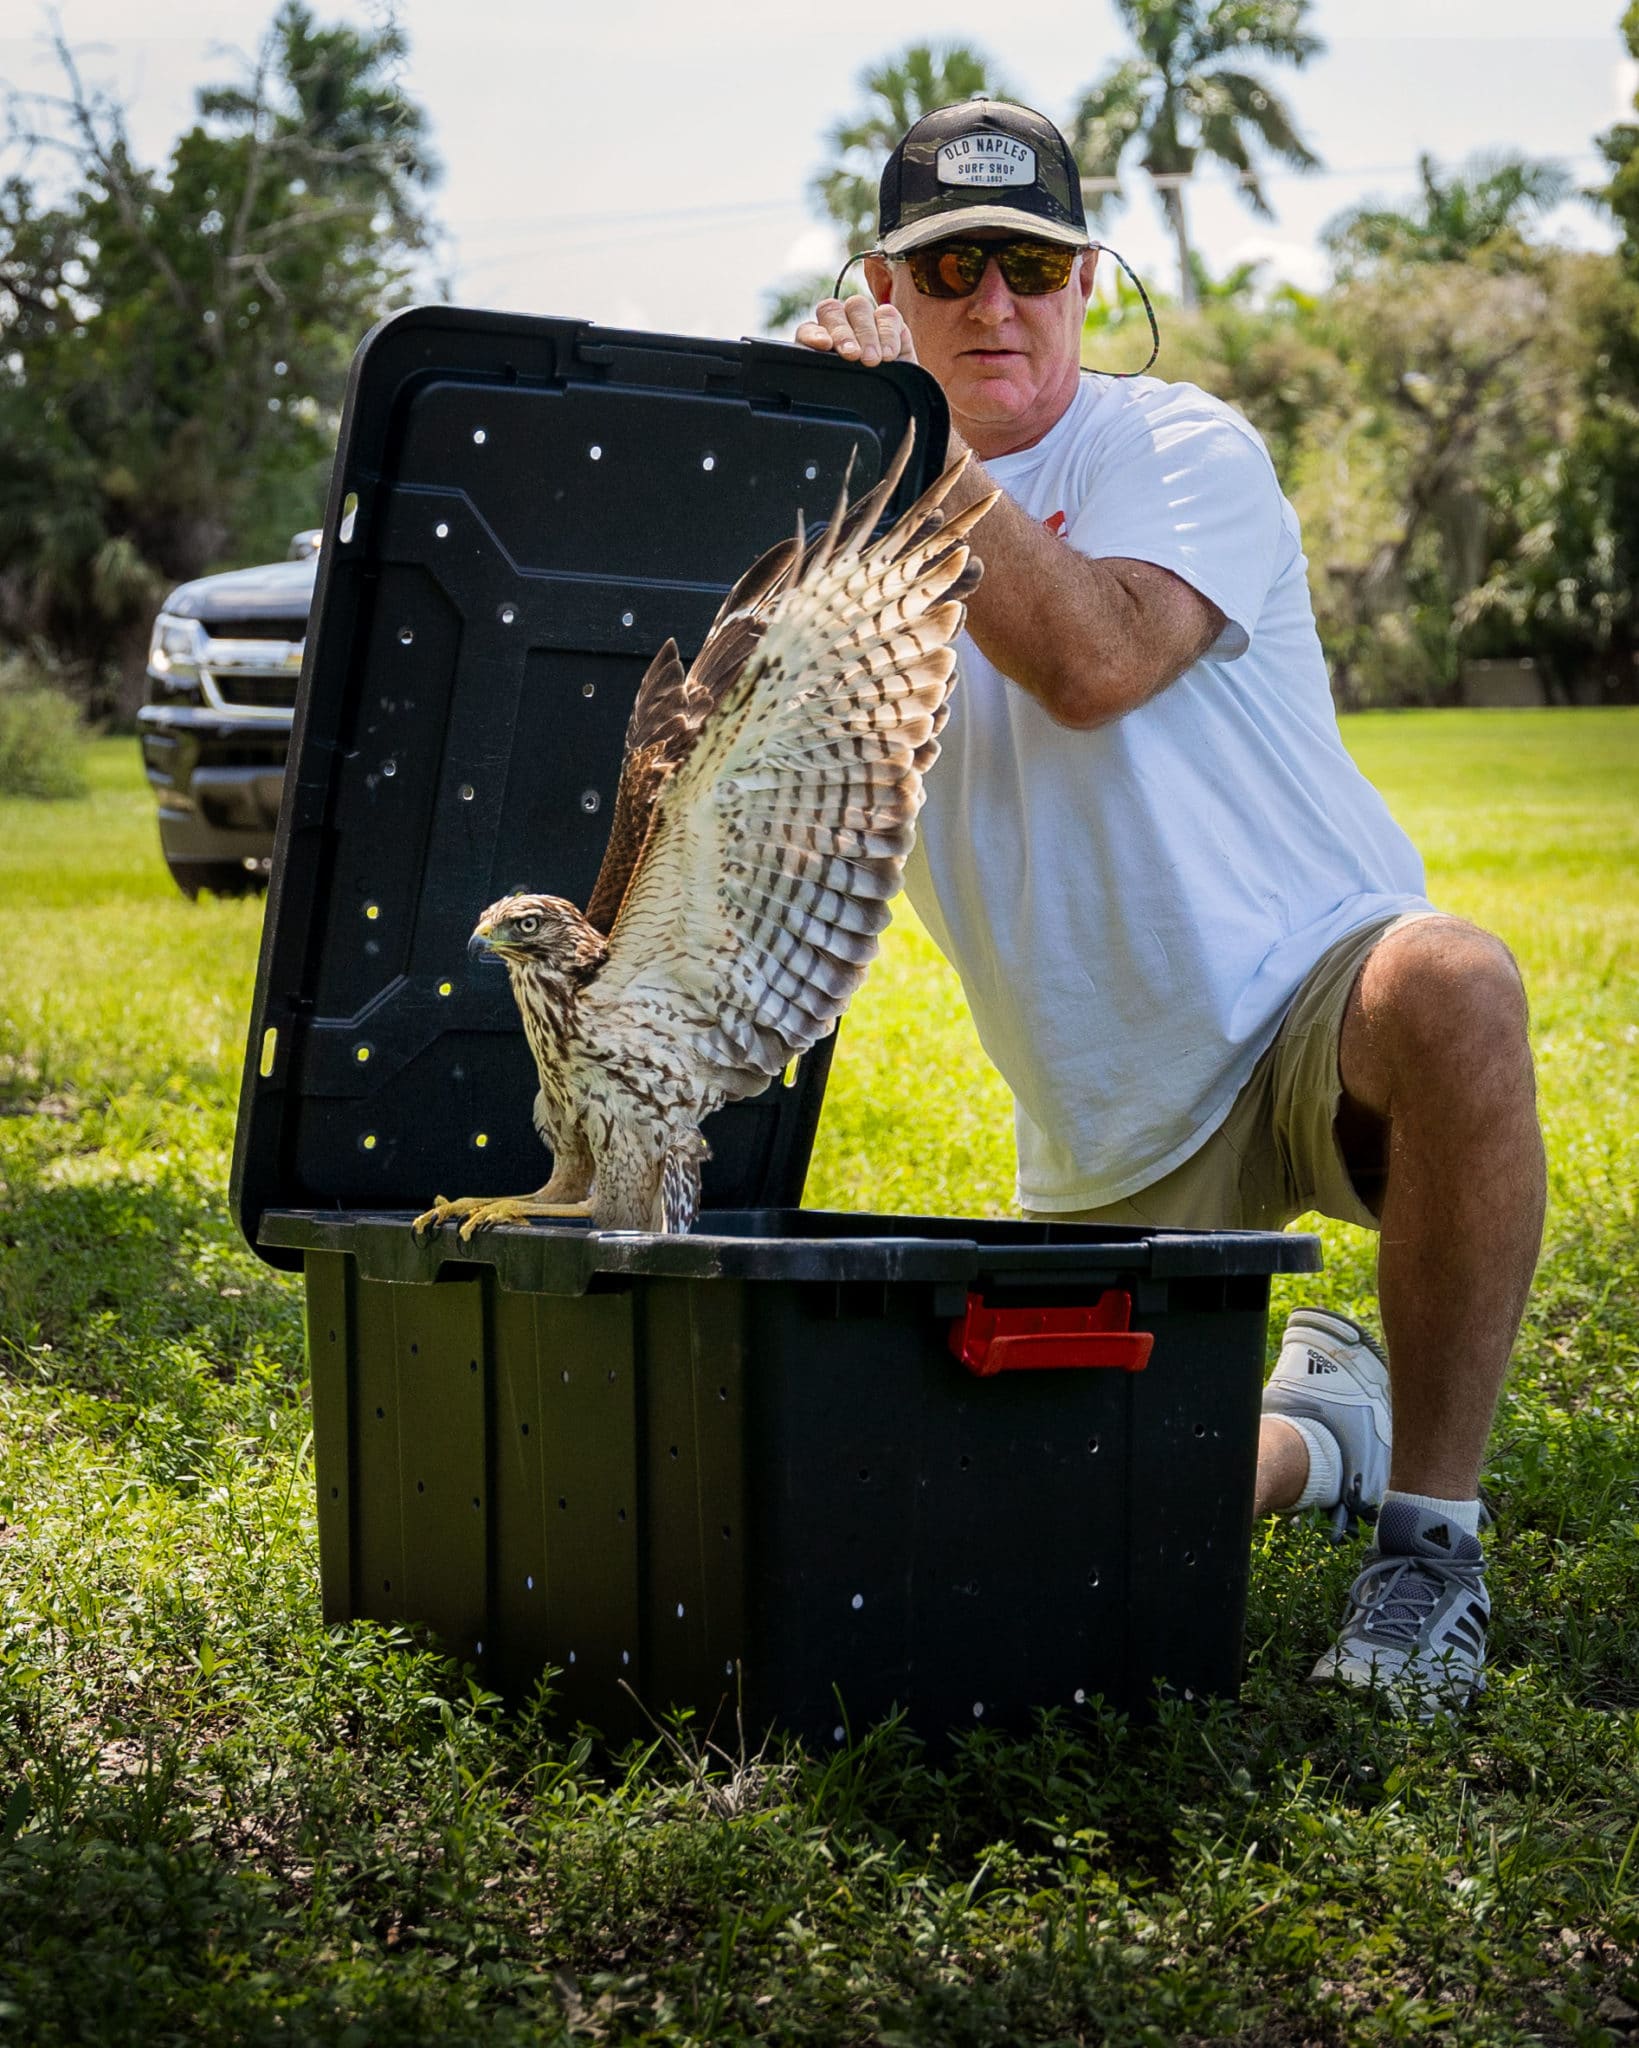 Conservancy of Southwest Florida volunteer opening a box and a rehabilitated red-shouldered hawk flying out